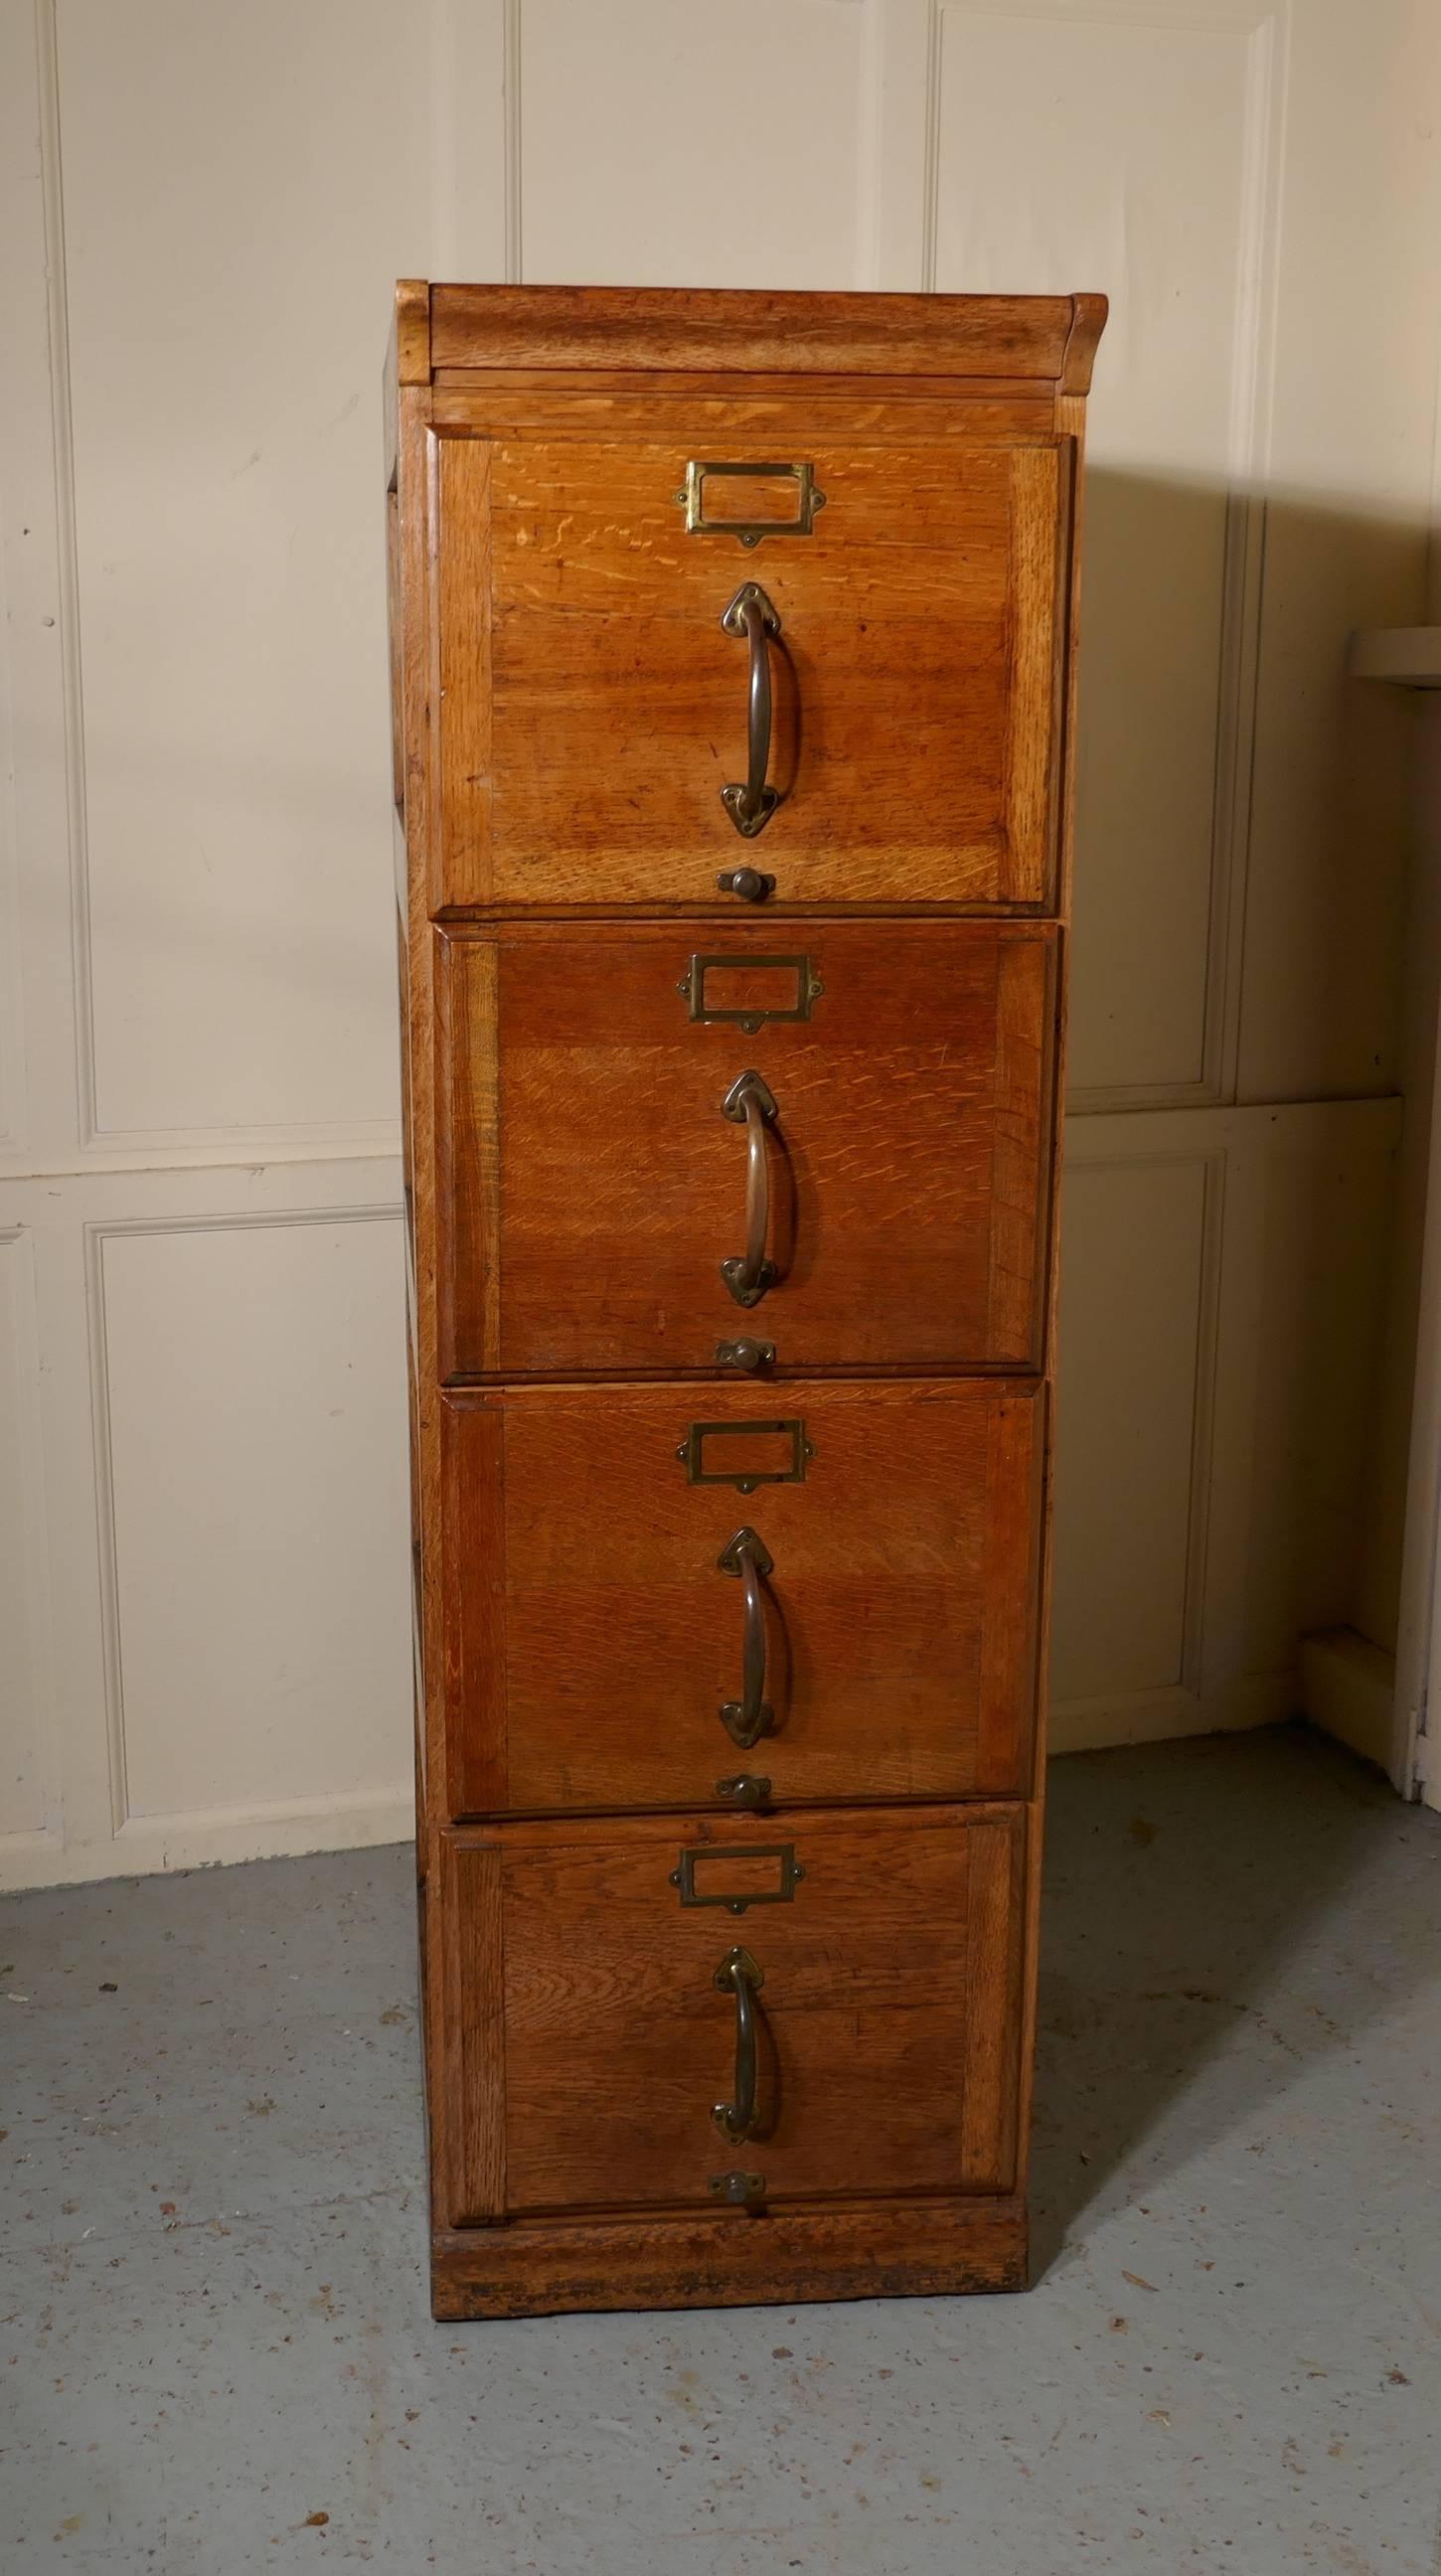 A Large Art Deco 4 Drawer Oak Filing Cabinet

This is an absolute must for every home office or study, the cabinet has 4 deep and roomy drawers, they all glide smoothly and have brass handles and card holders on the front ( they are 15” wide, 20”